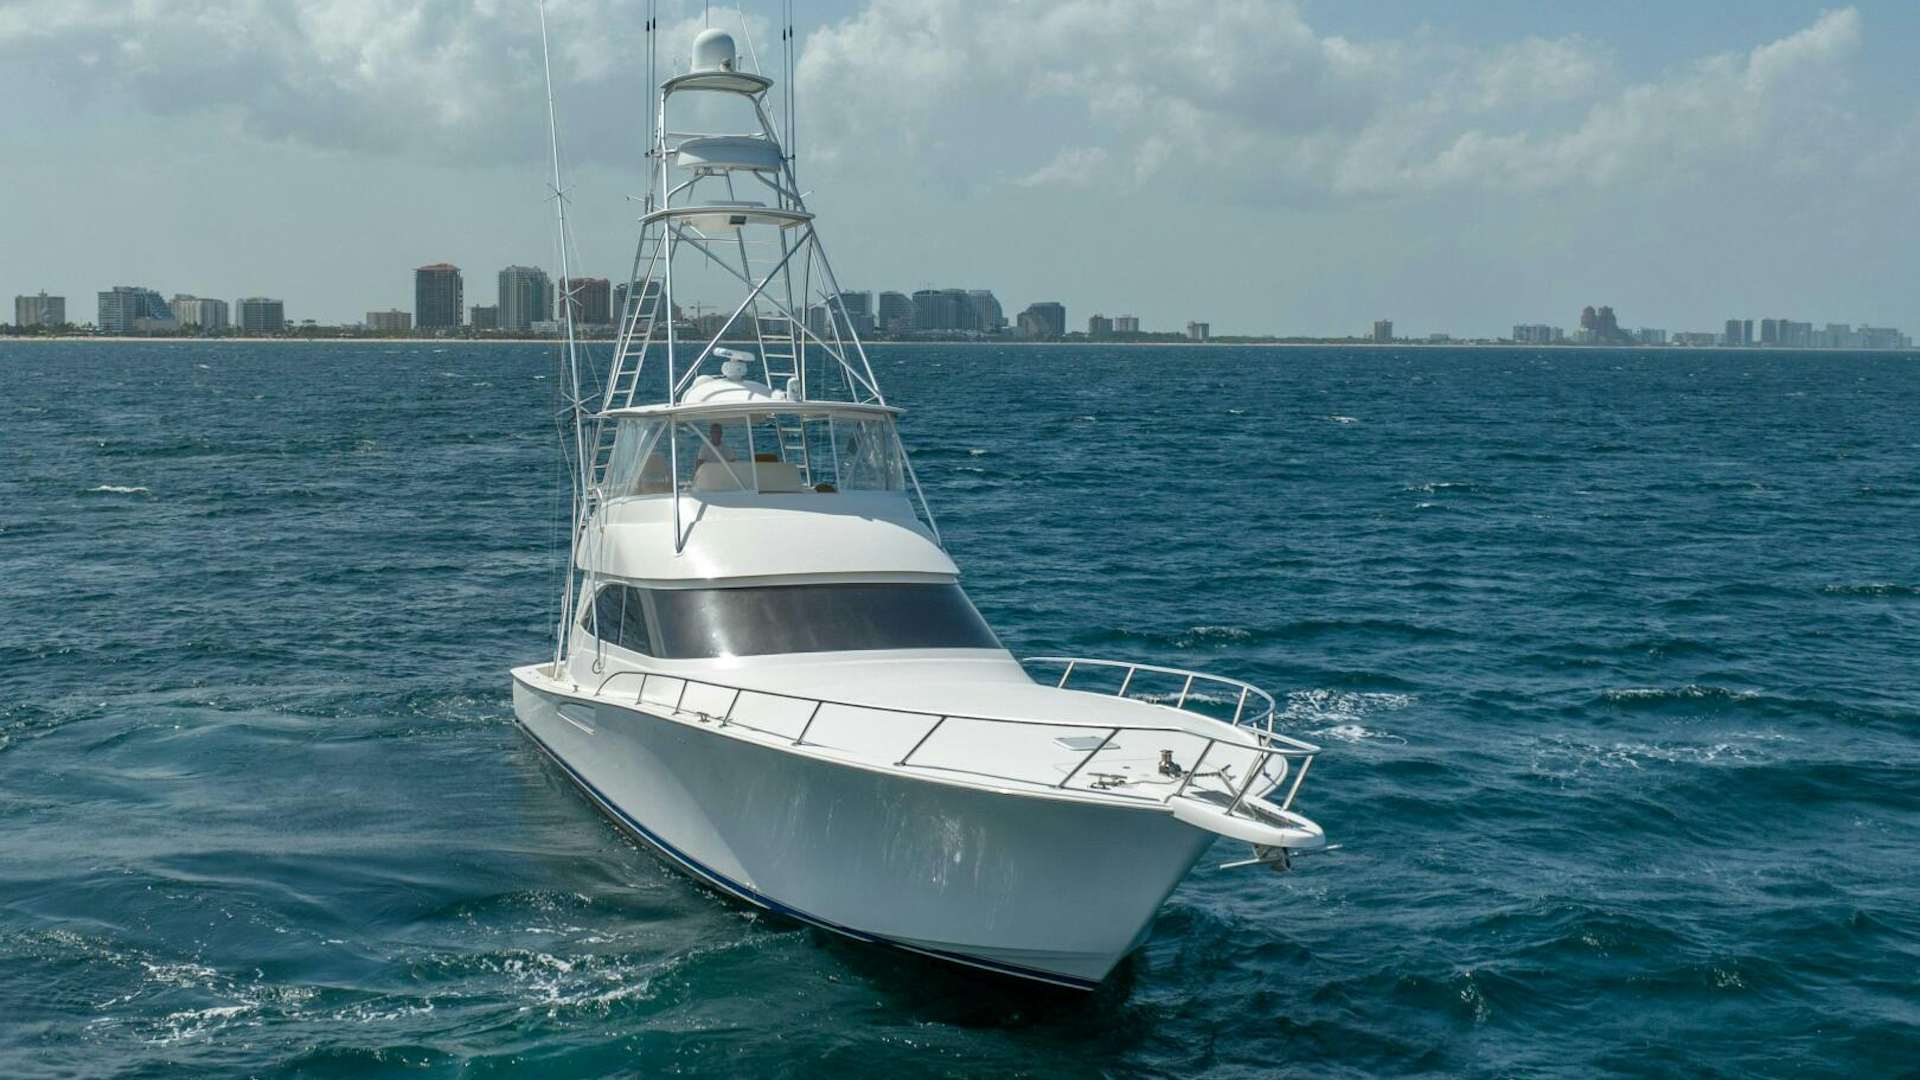 No collars
Yacht for Sale